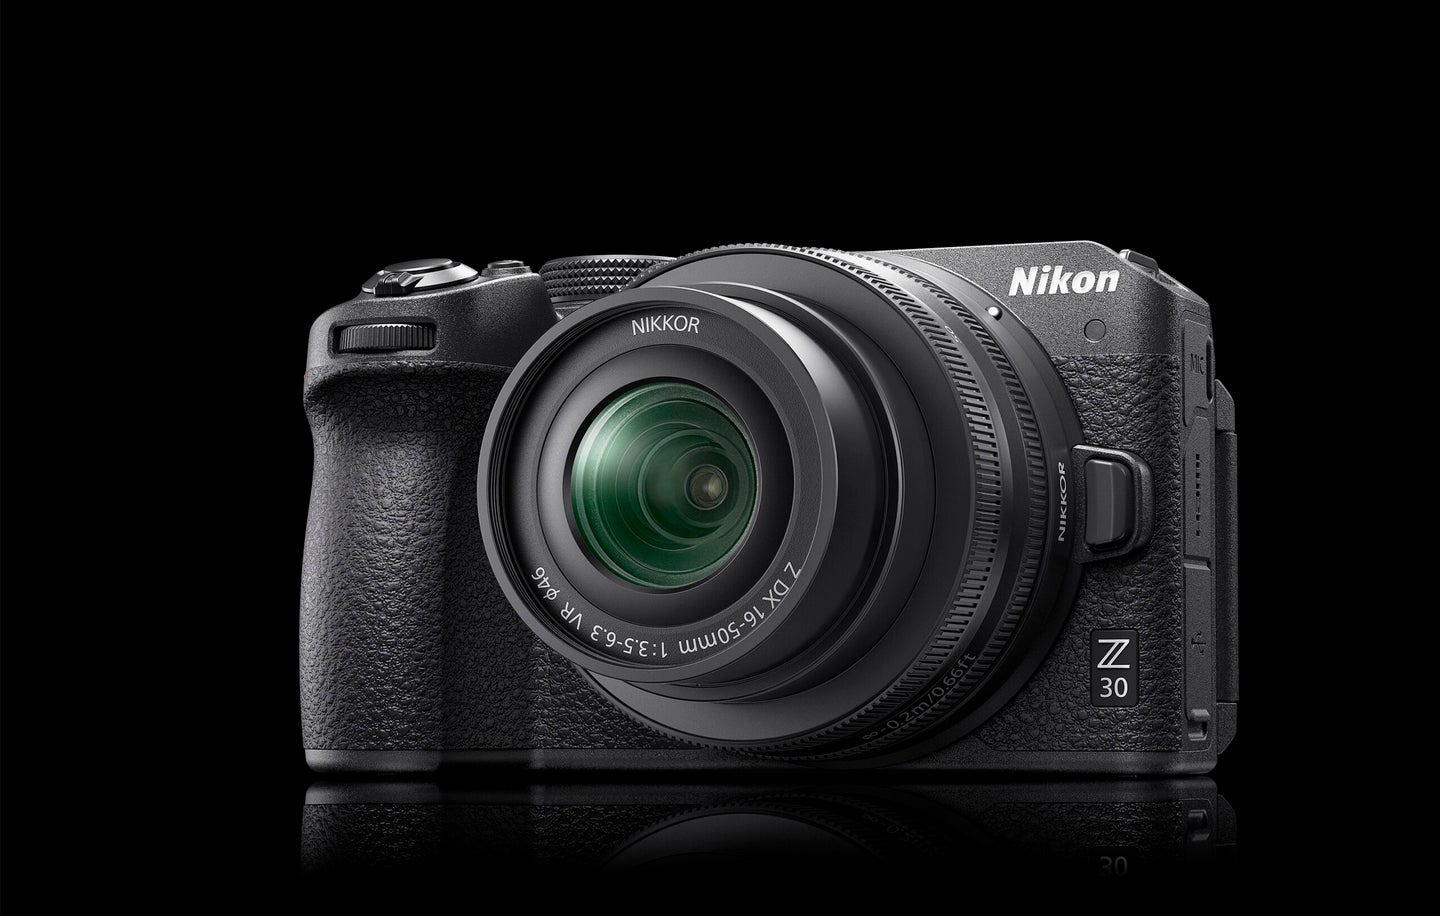 New gear: The Nikon Z30 shoots 4K for less